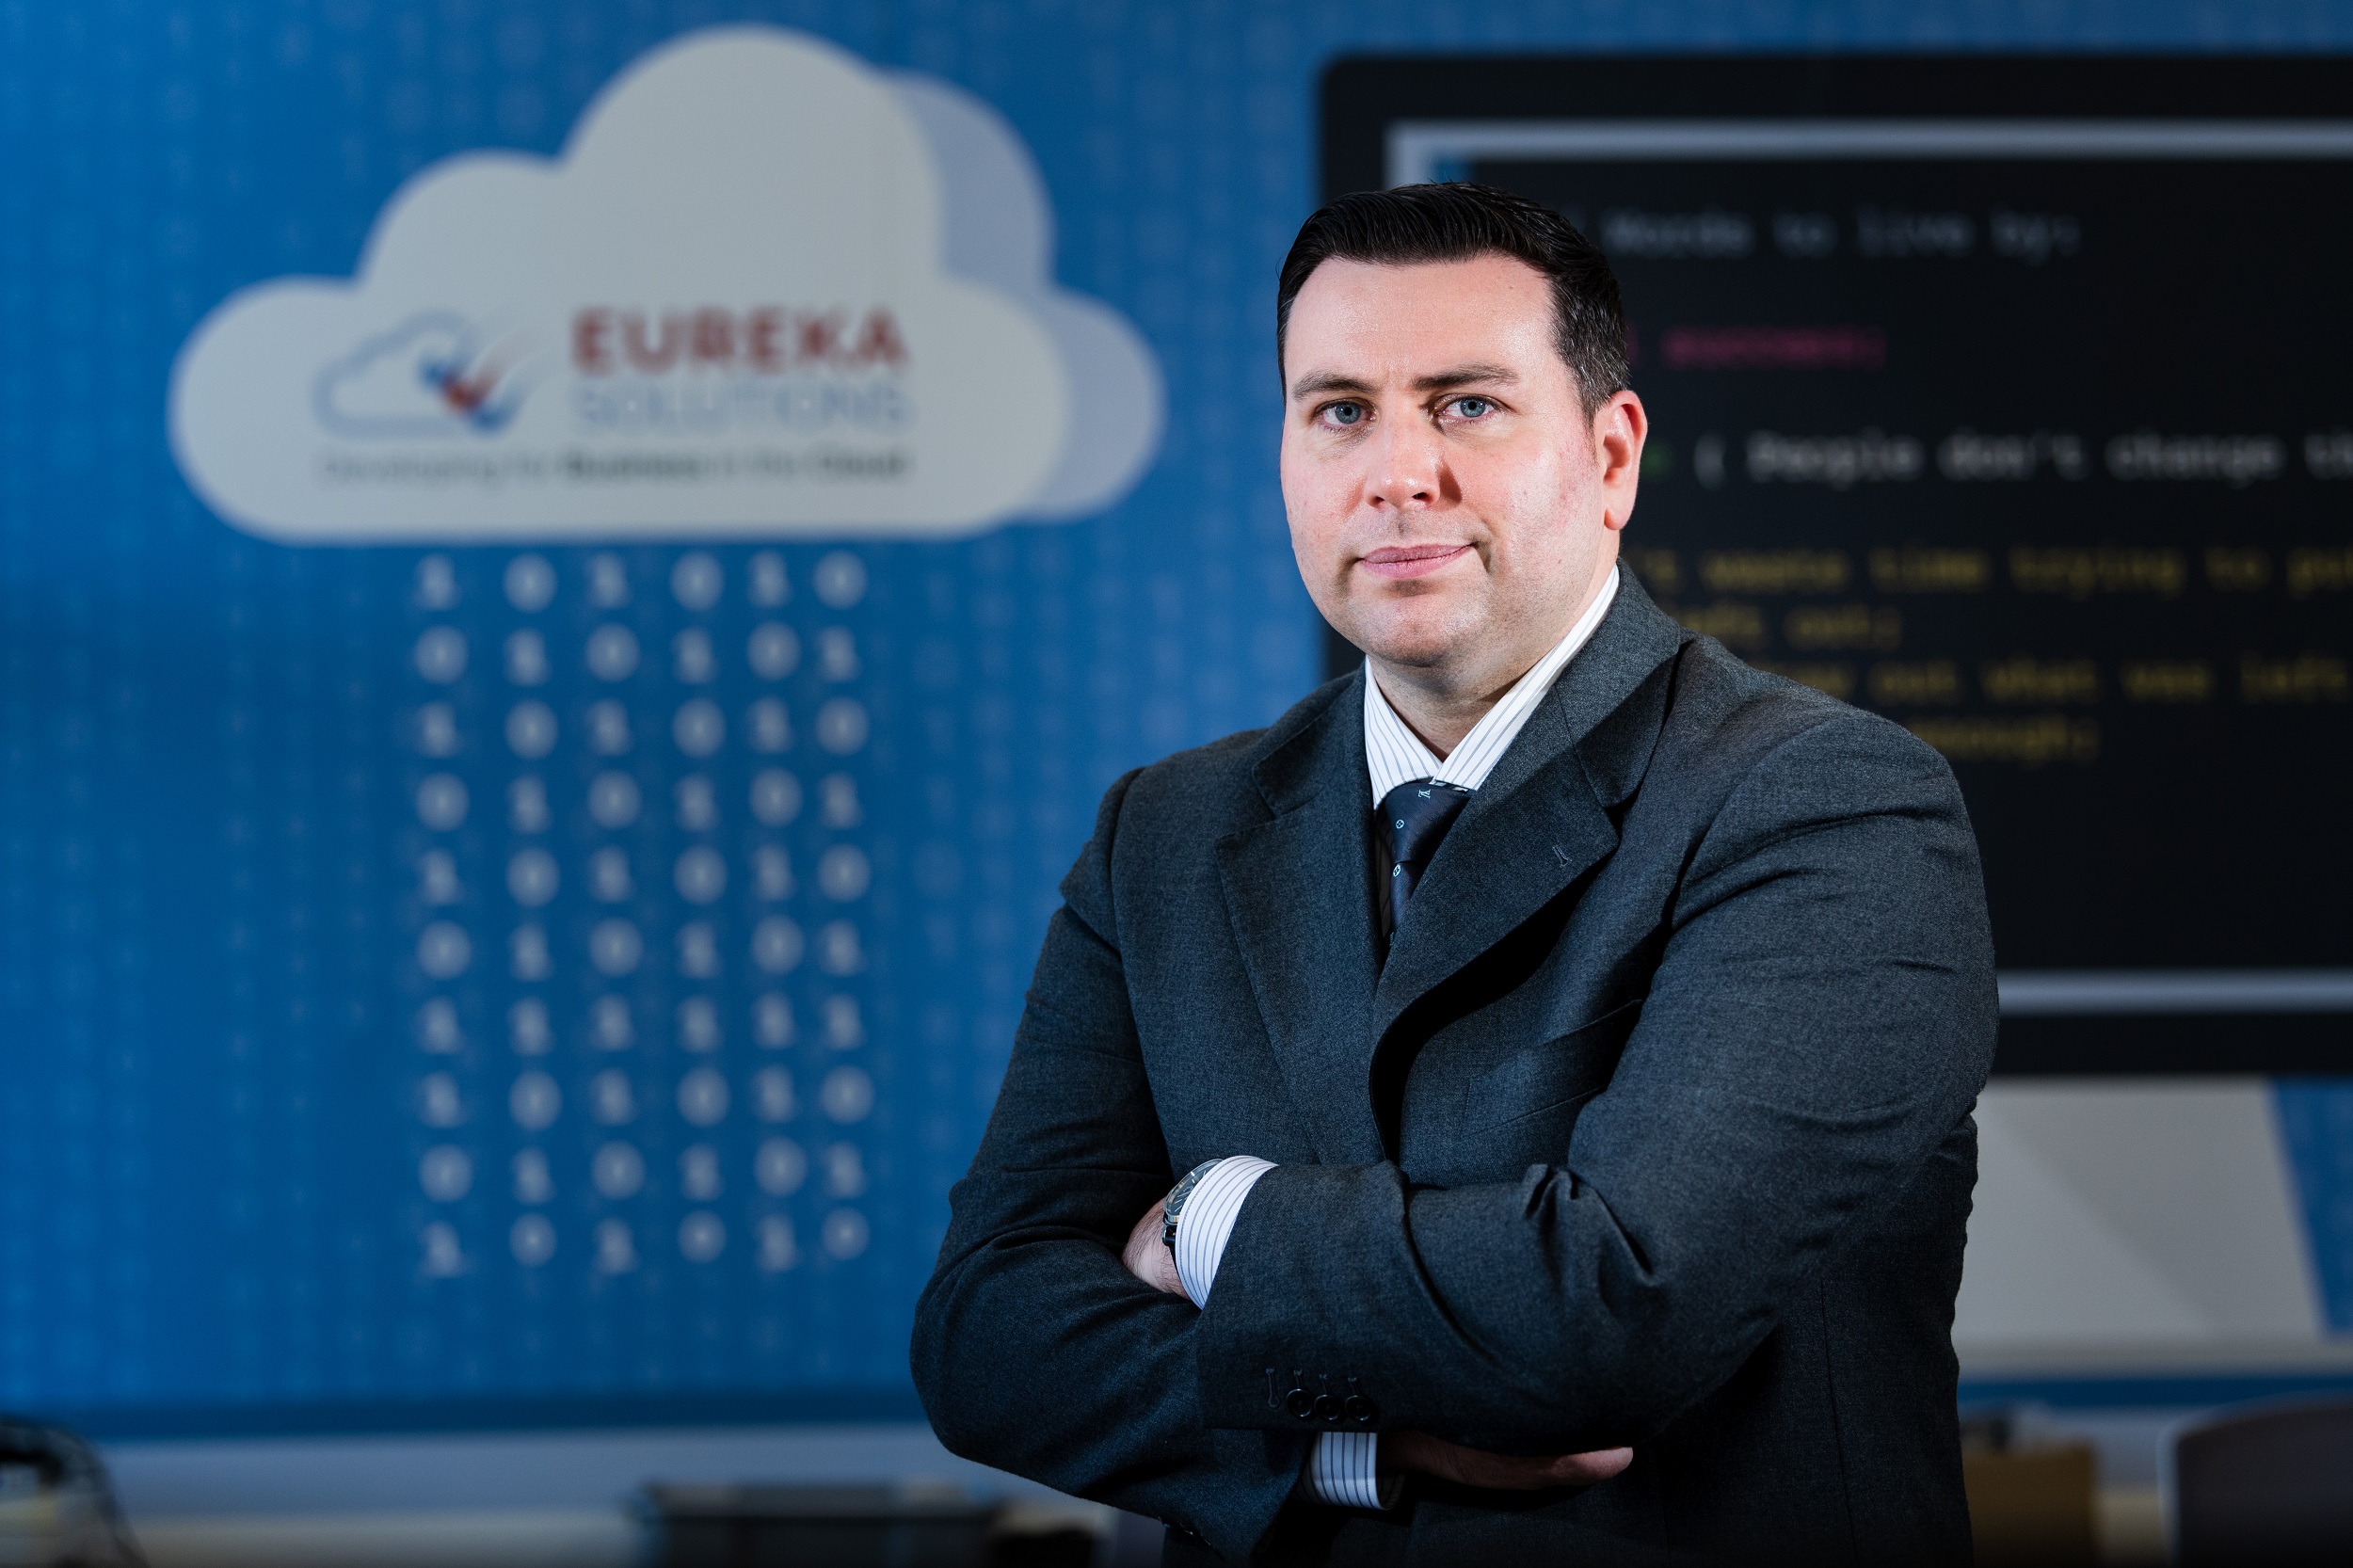 Eureka Solutions signs deal with world renowned rugby club Wasps